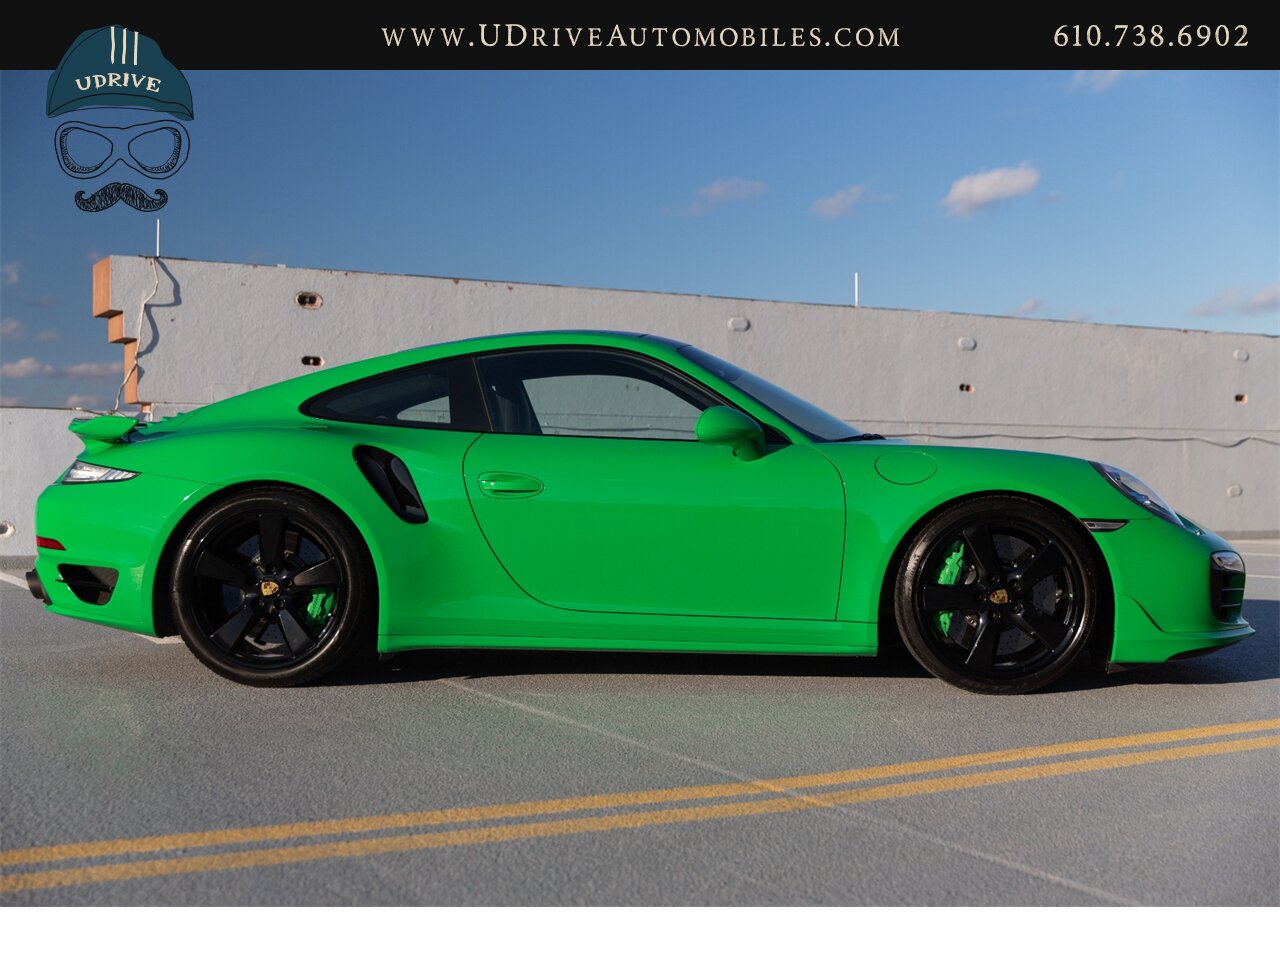 2016 Porsche 911 Turbo S PTS Viper Green Aerokit $203k MSRP  Painted Side Skirts Painted Grilles Wheels in Black - Photo 15 - West Chester, PA 19382